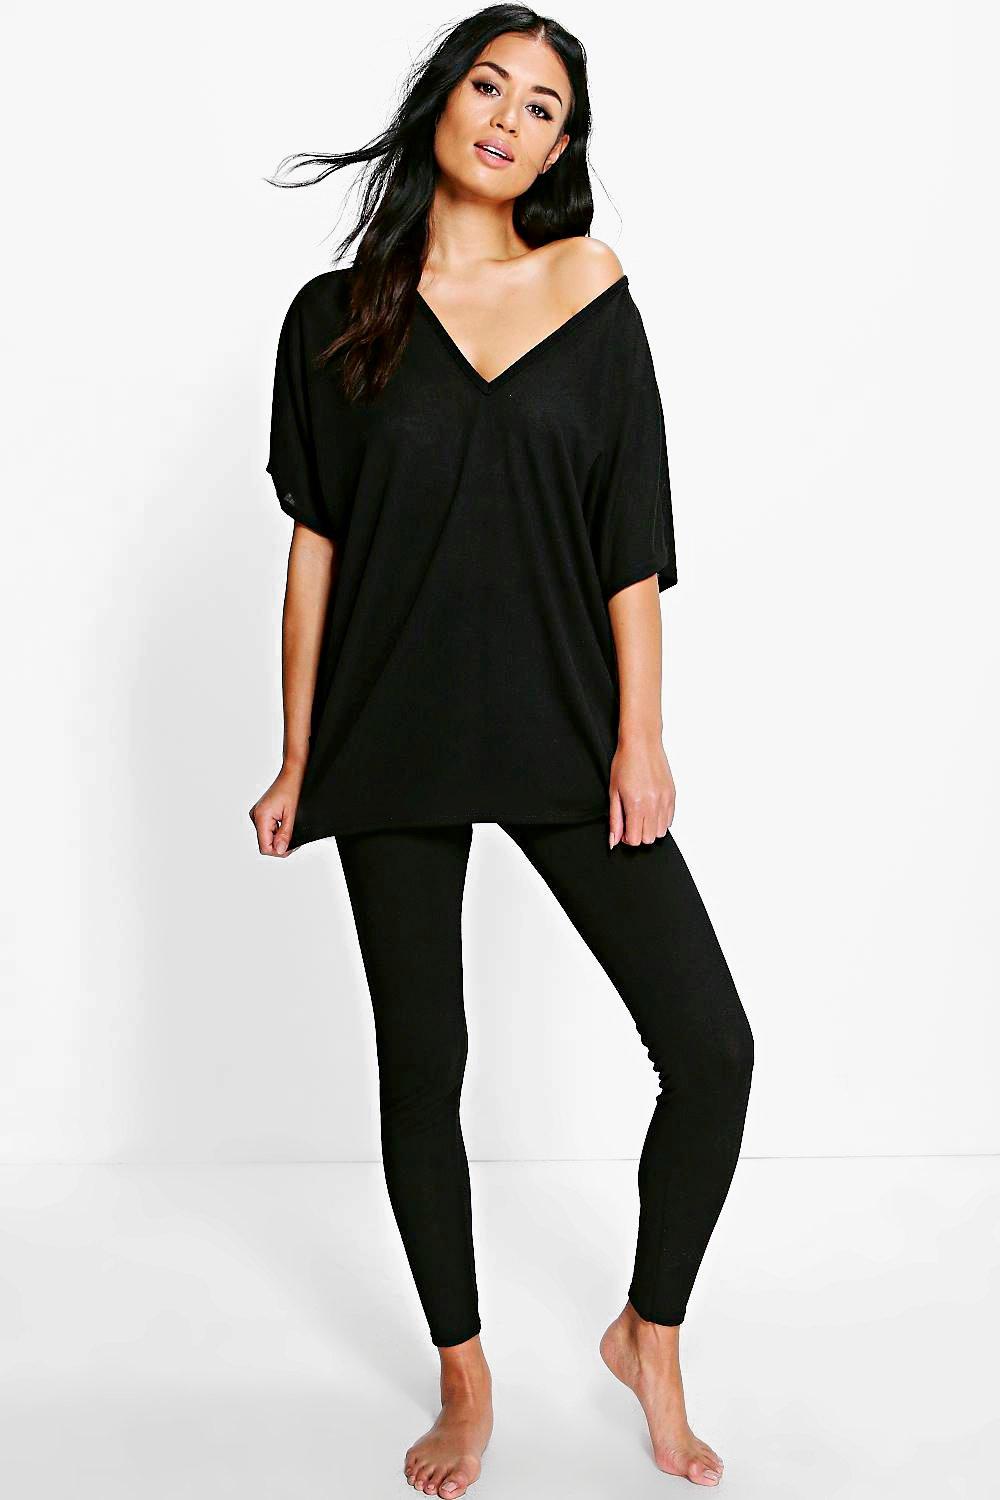 How To Wear An Oversized T-shirt With Leggings Depot